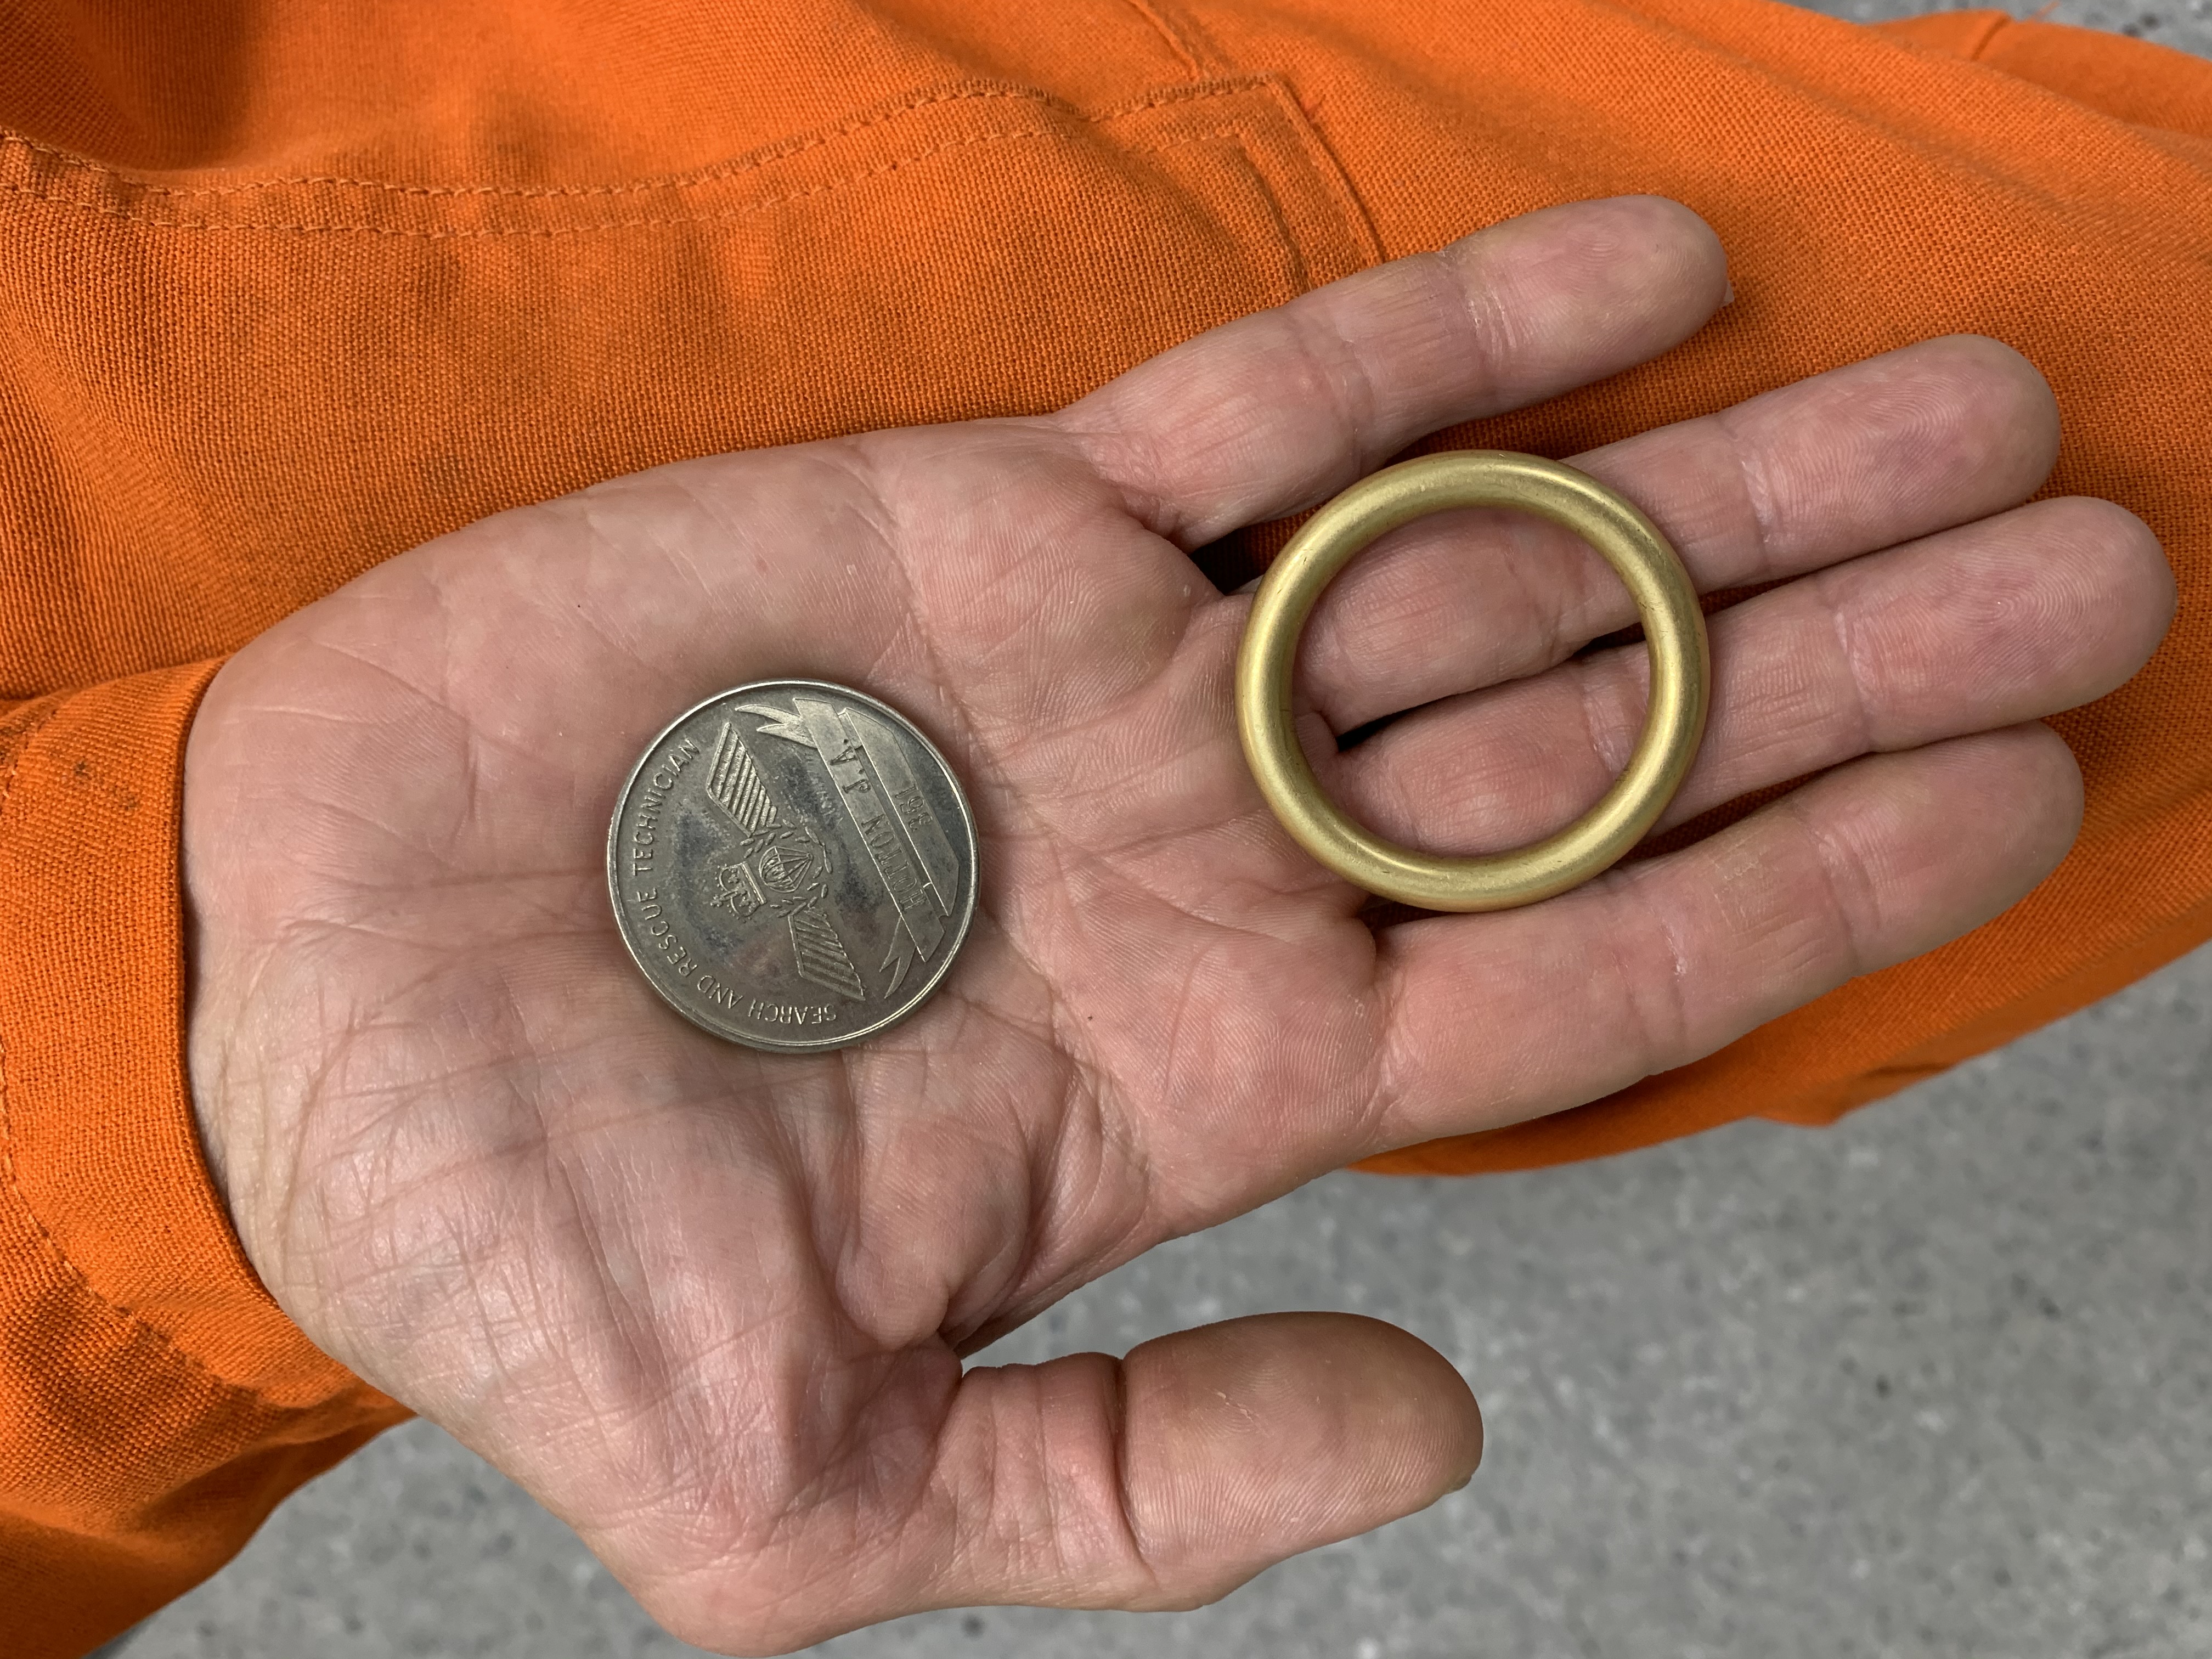 Two pocket finds: Sergeant André Hotton carries both his 1990 search and rescue training course #27 coin, and a well-worried brass ring from an old diving bag. PHOTO: Sara White